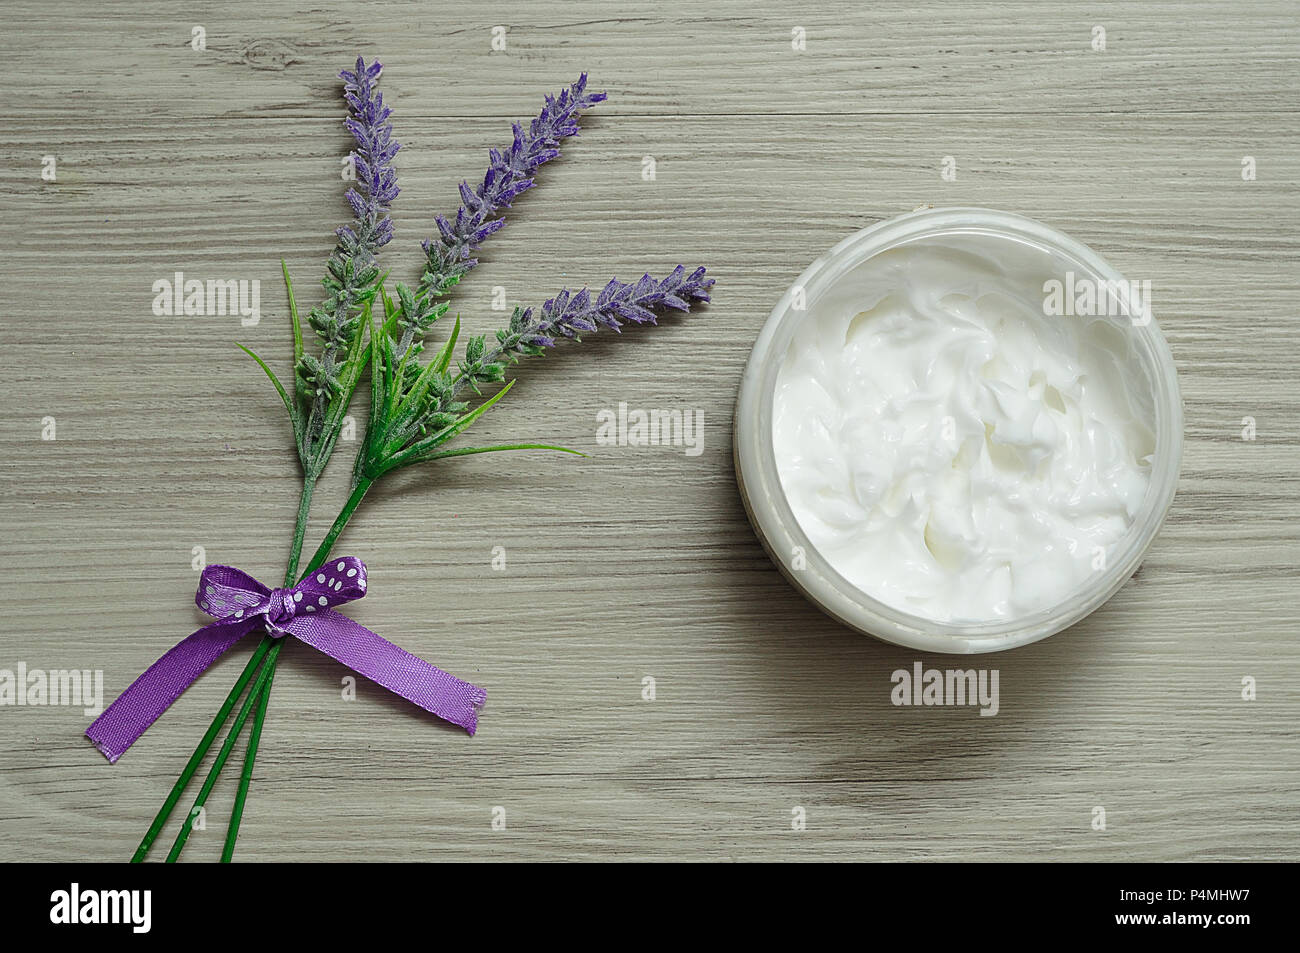 A bunch of lavender displayed with a container white body lotionbeauty, herb, green, relaxation, lavender, leaf, flower, bouquet, purple, ingredient,  Stock Photo